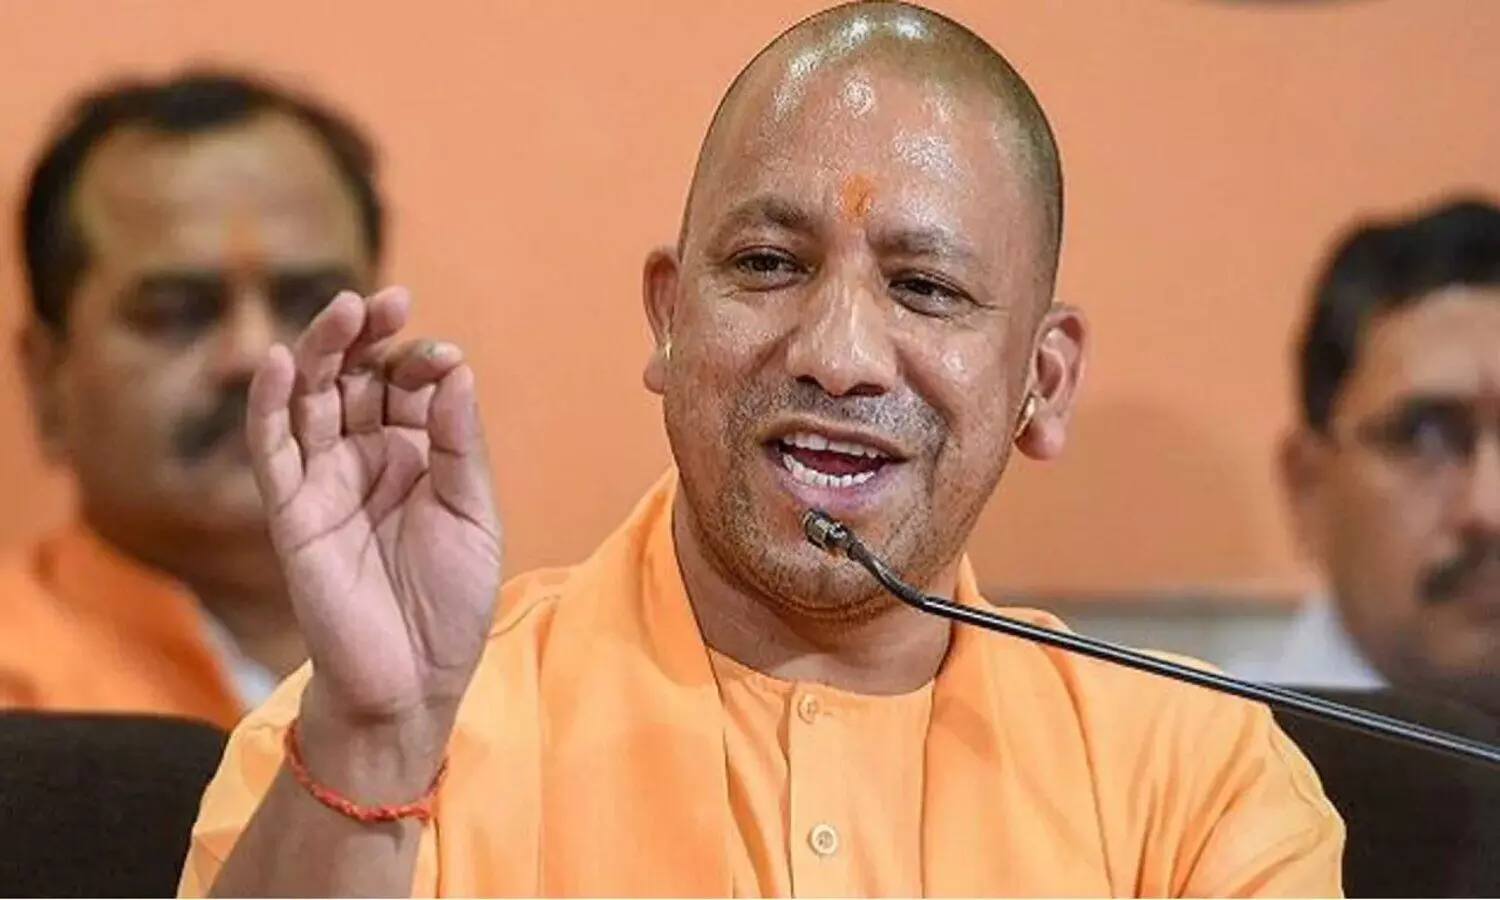 cm yogi said anarchy will spread due to increase in population of only one class